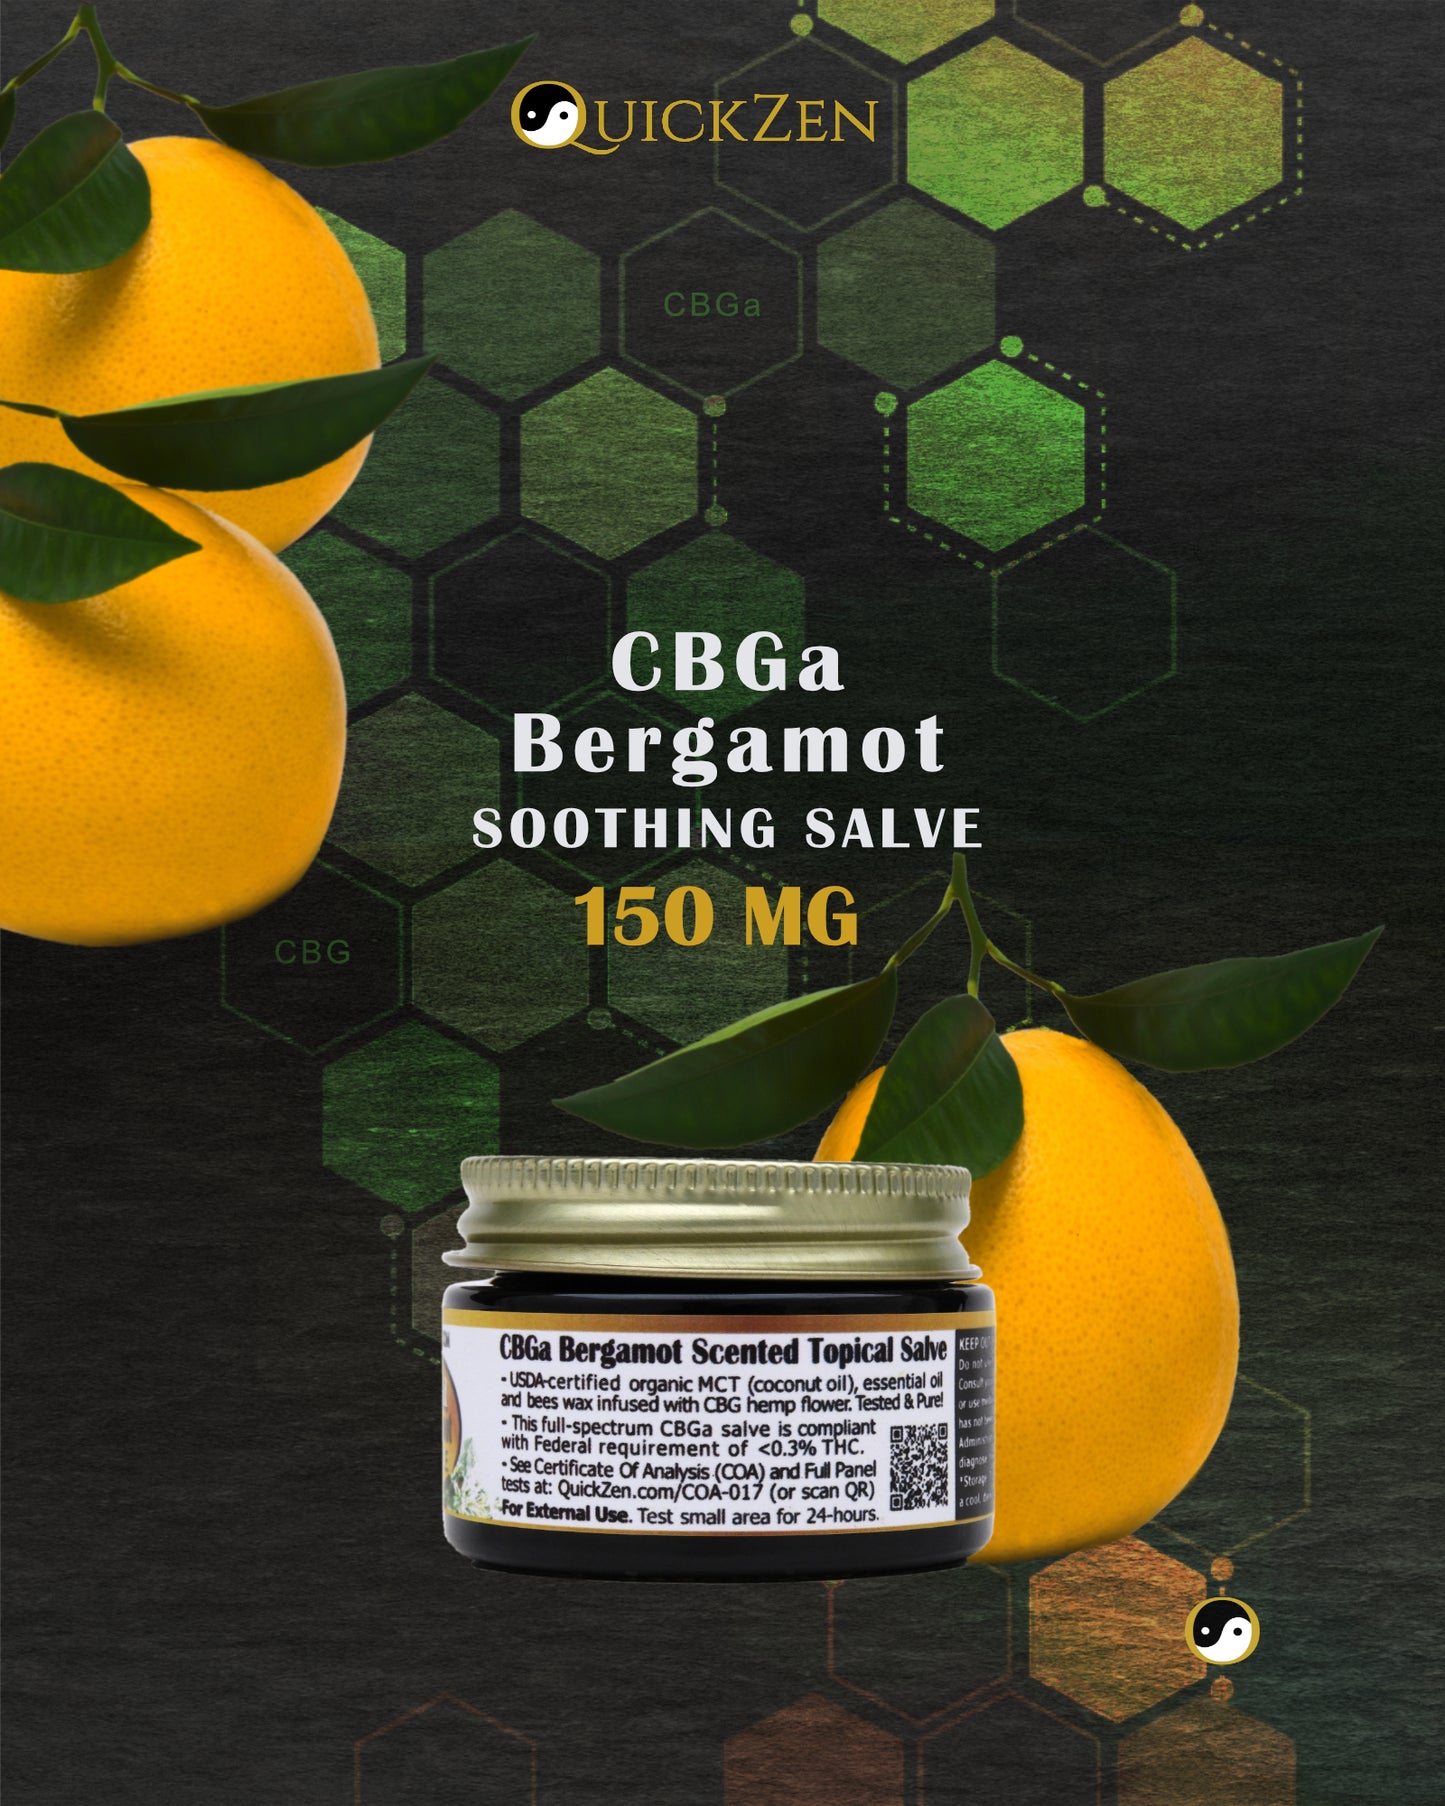 Rear view one ounce jar of bergamot scented CBGa salve, 150 milligrams. With three whole oranges. Green molecule icons in the background.